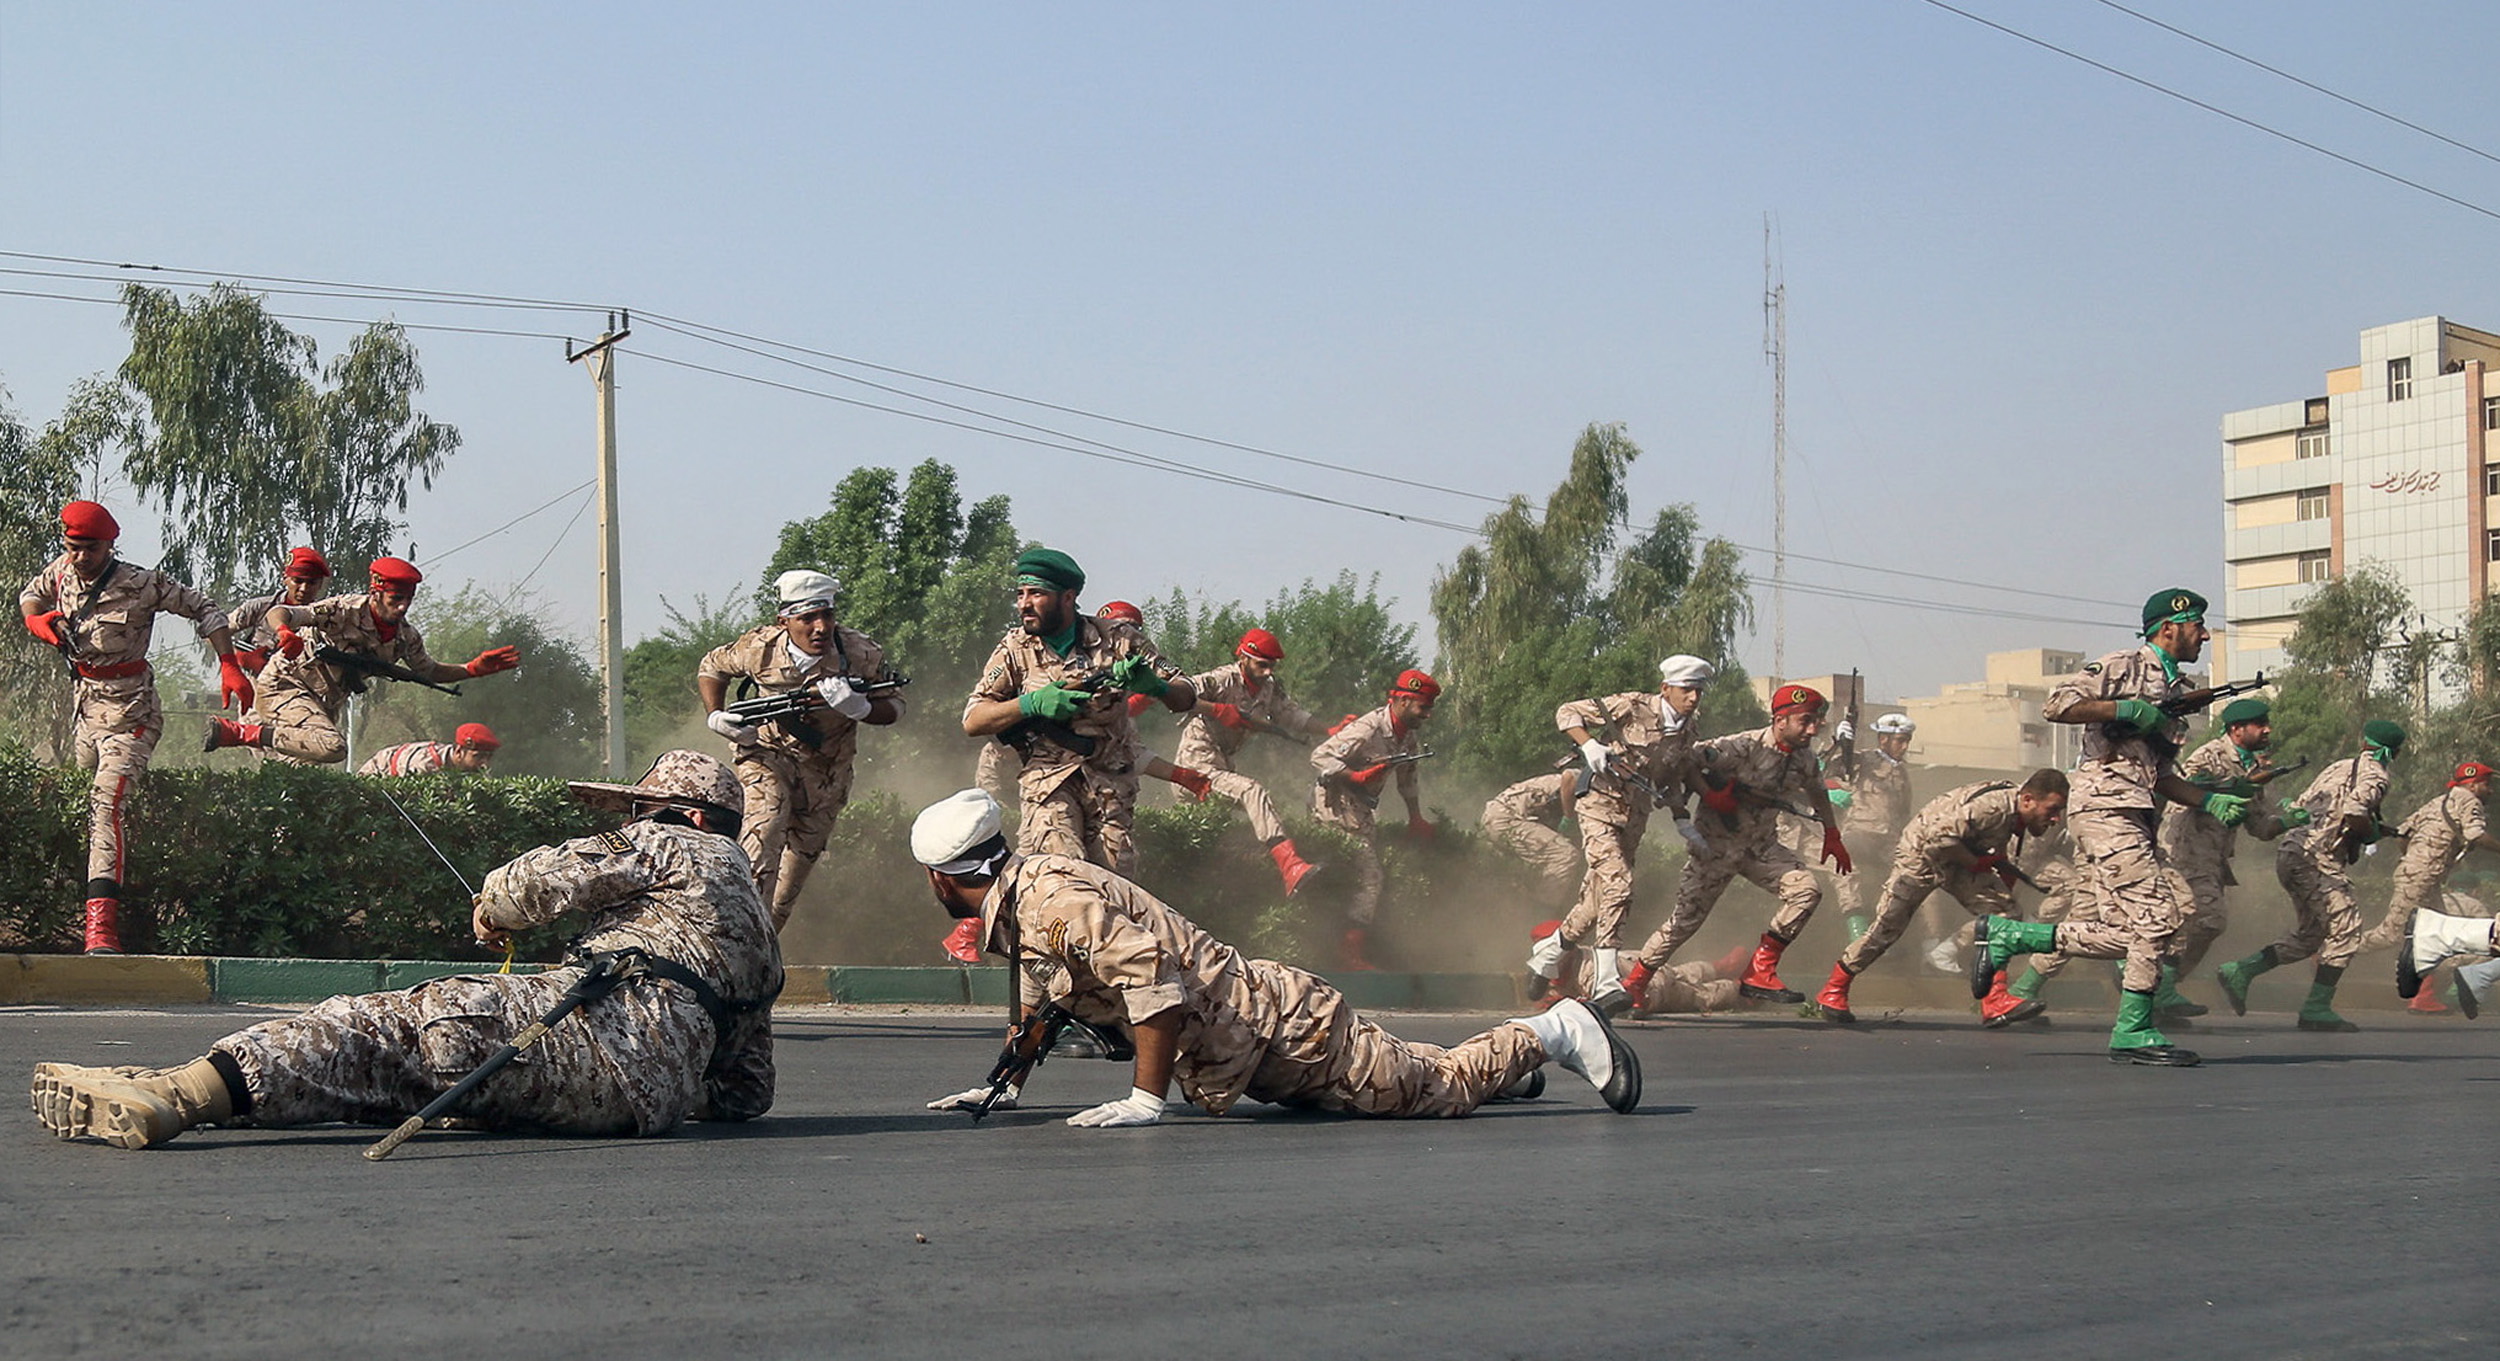 epa07039277 Iranian soldiers jump over a hedge at a street as they run for cover during a terror attack that occurred during a military parade in the city of Ahvaz, southwest Iran, 22 September 2018. According to media reports, gunmen have opened fire during an Iranian military parade in the south-western city of Ahvaz, killing at least 25 people, including civilians, and injuring dozens.  EPA/MORTEZA JABERIAN